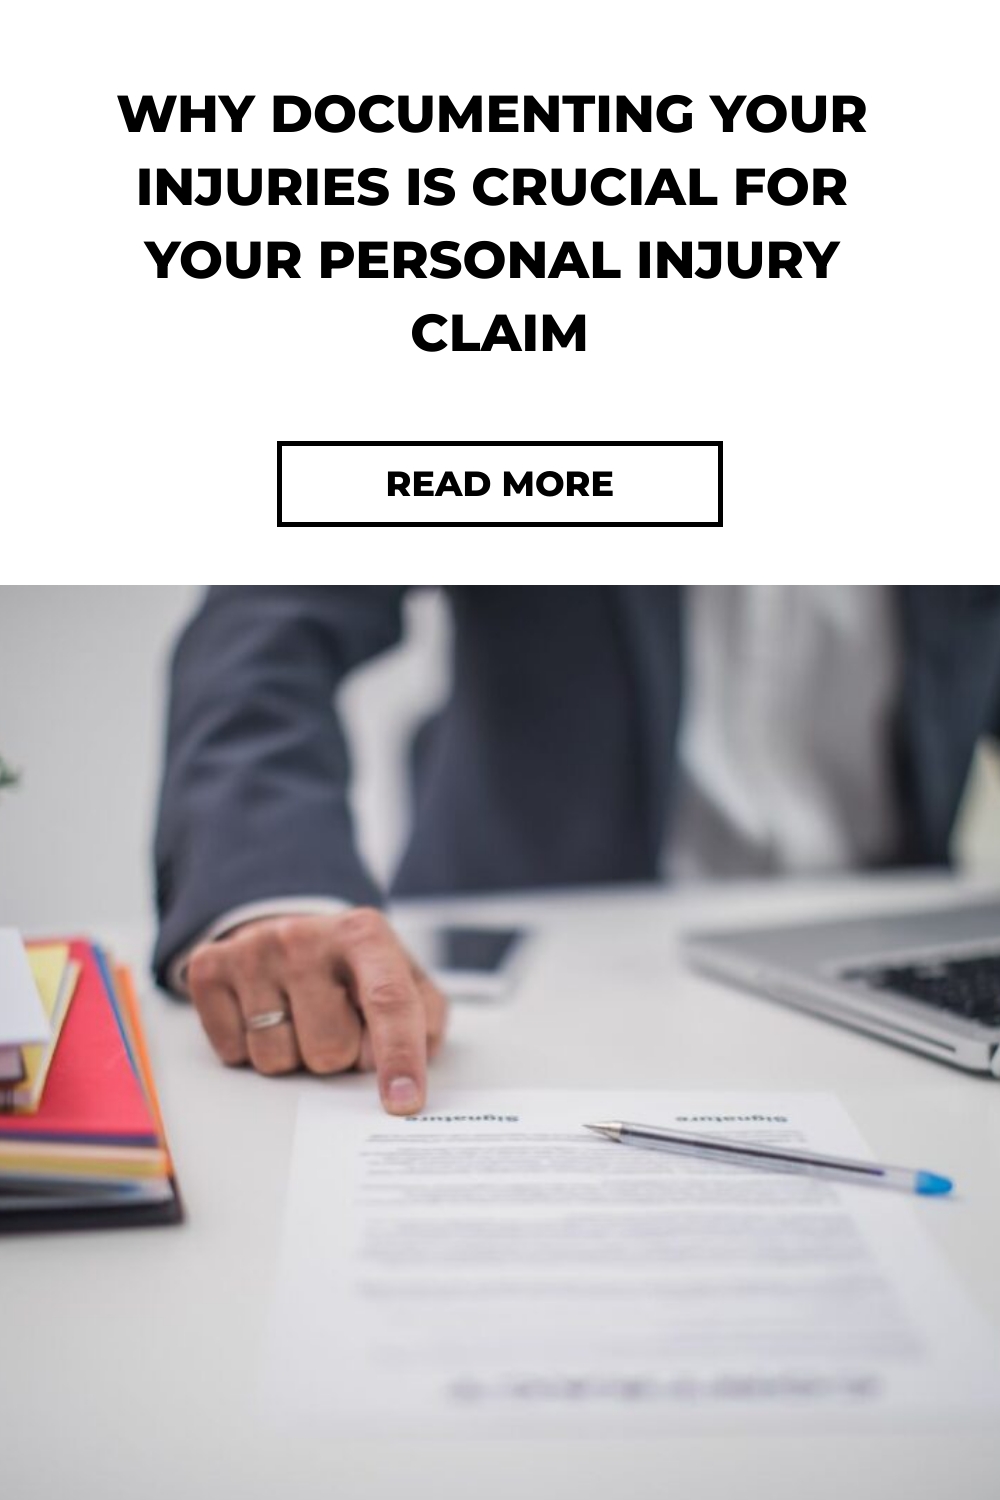 Why Documenting Your Injuries is Crucial for Your Personal Injury Claim